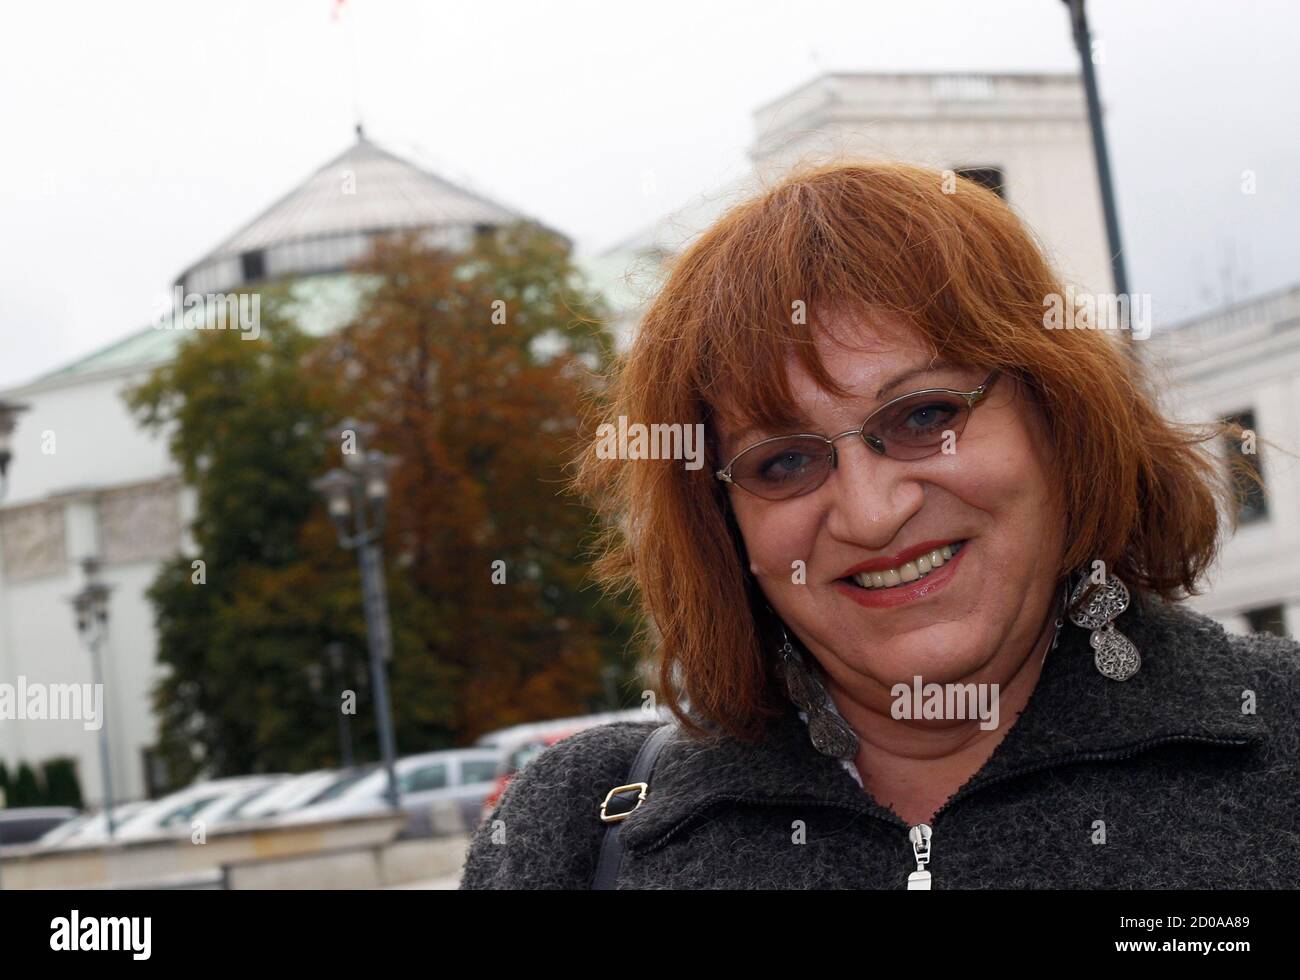 Anna Grodzka, from a newly formed liberal party called Palikot's Support Movement, smiles outside Poland's parliament in Warsaw October 12, 2011. Grodzka, the first transsexual to win a seat in Poland's parliament, said on Monday she was on a mission to help Poles in this staunchly Roman Catholic country to improve the understanding of problems facing people who have changed their gender. REUTERS/Peter Andrews (POLAND - Tags: ELECTIONS POLITICS HEADSHOT) Stock Photo